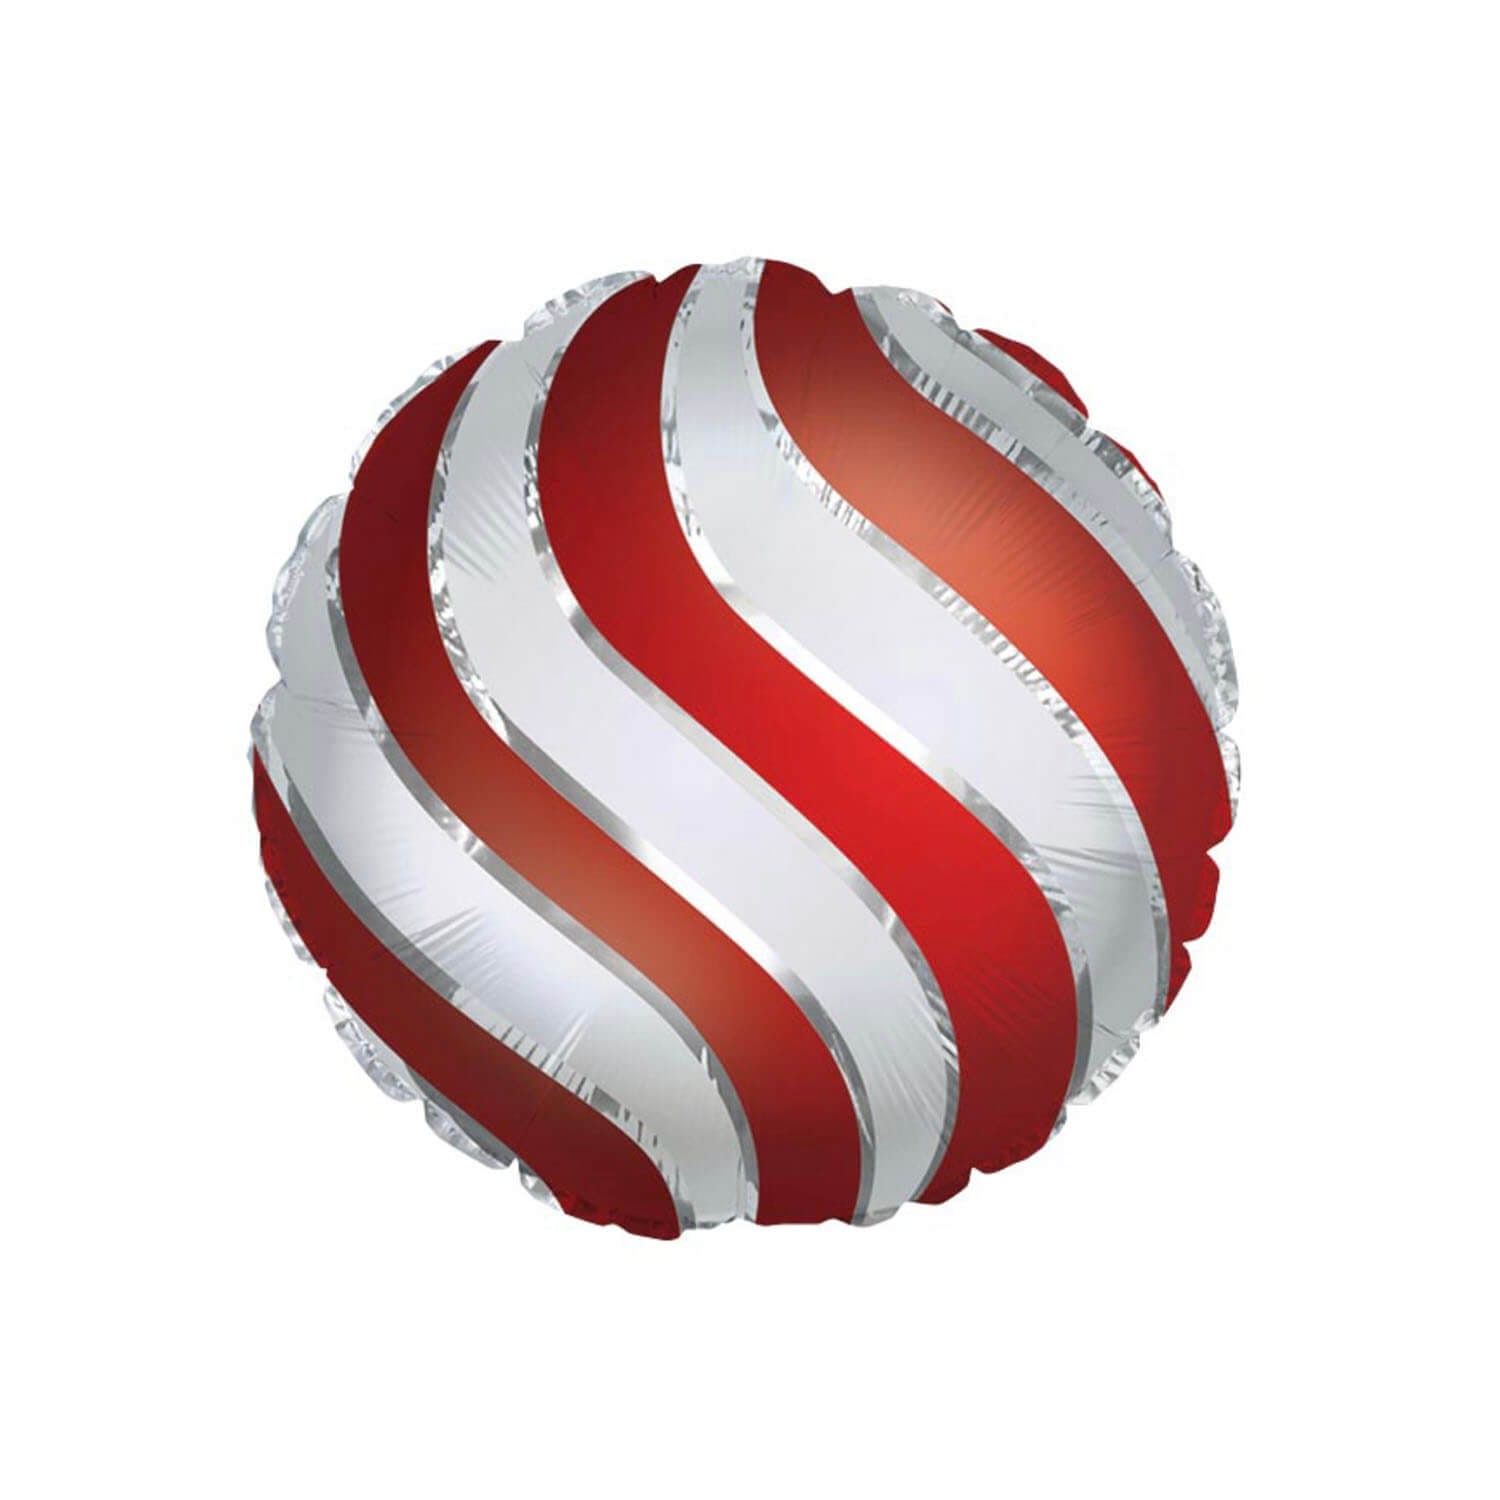 Red, white and silver holiday ornament available at Christmas from Just Peachy.